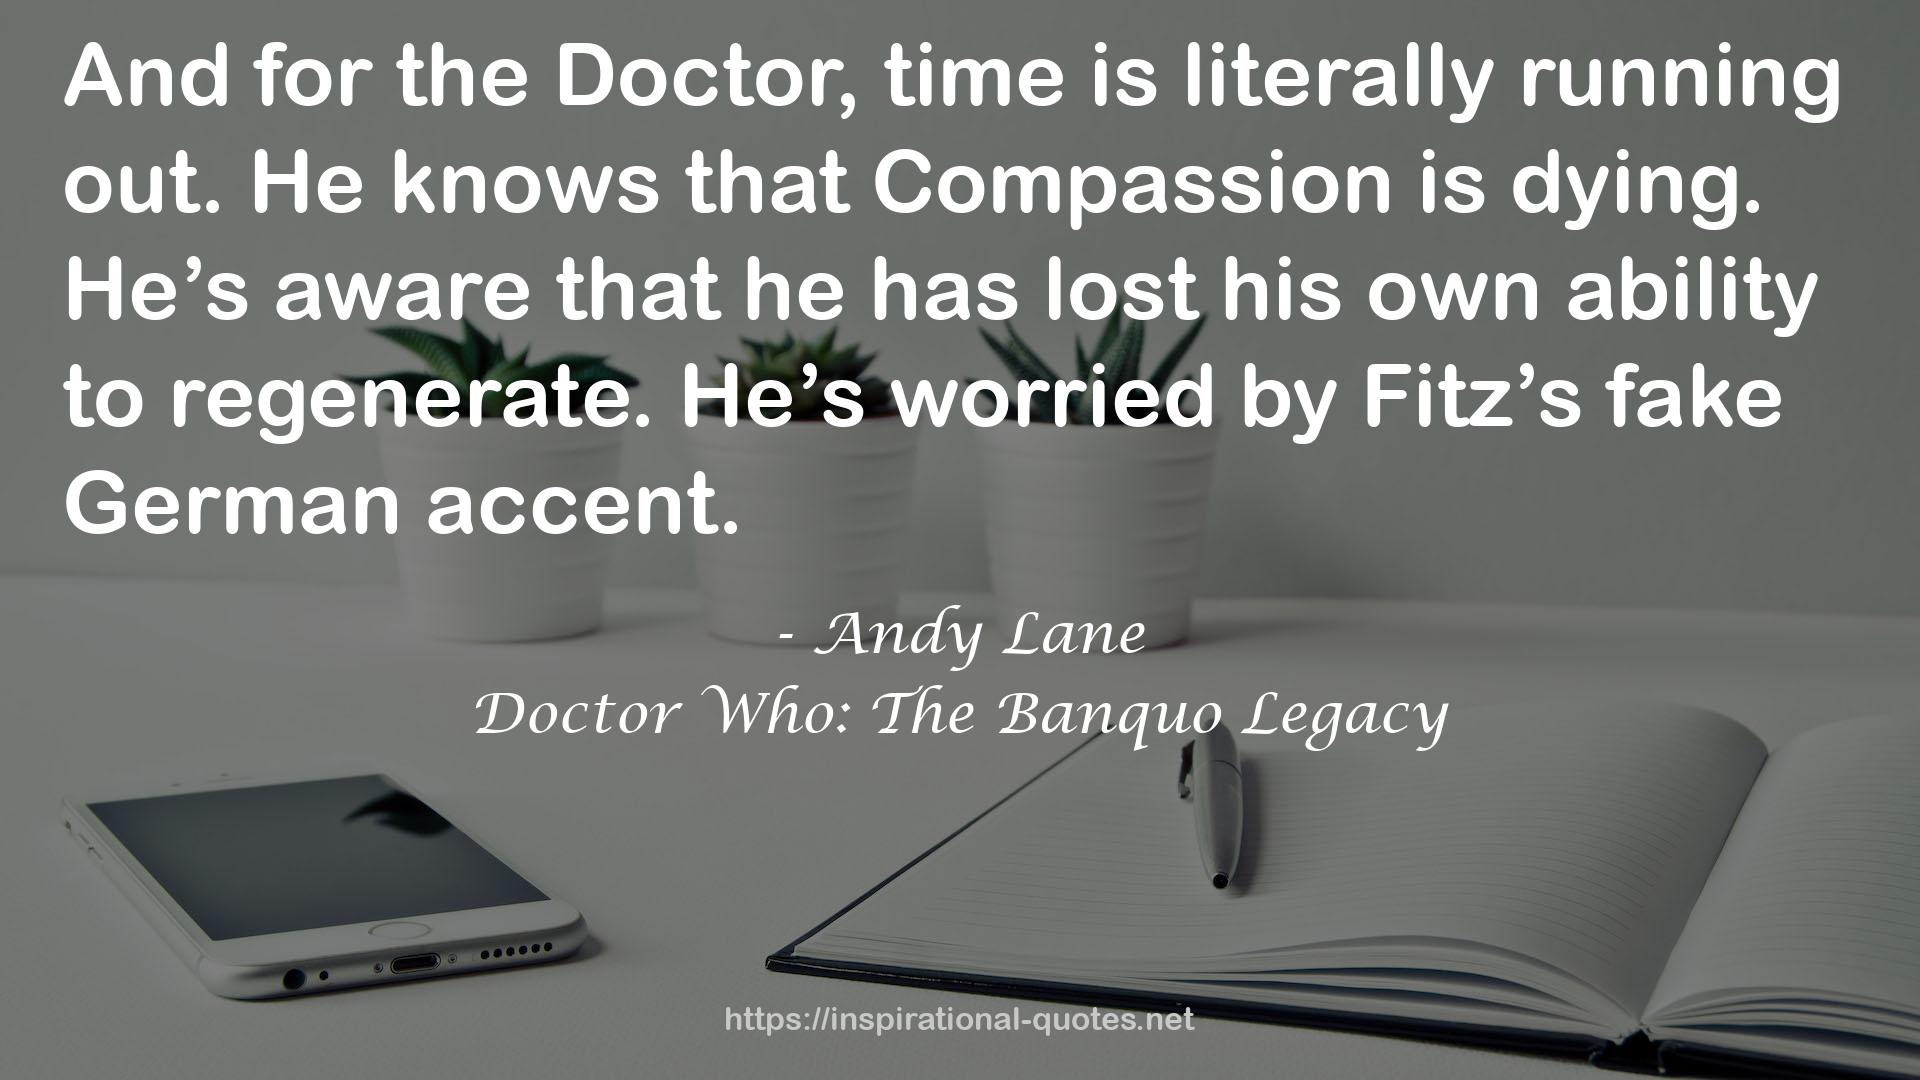 Doctor Who: The Banquo Legacy QUOTES